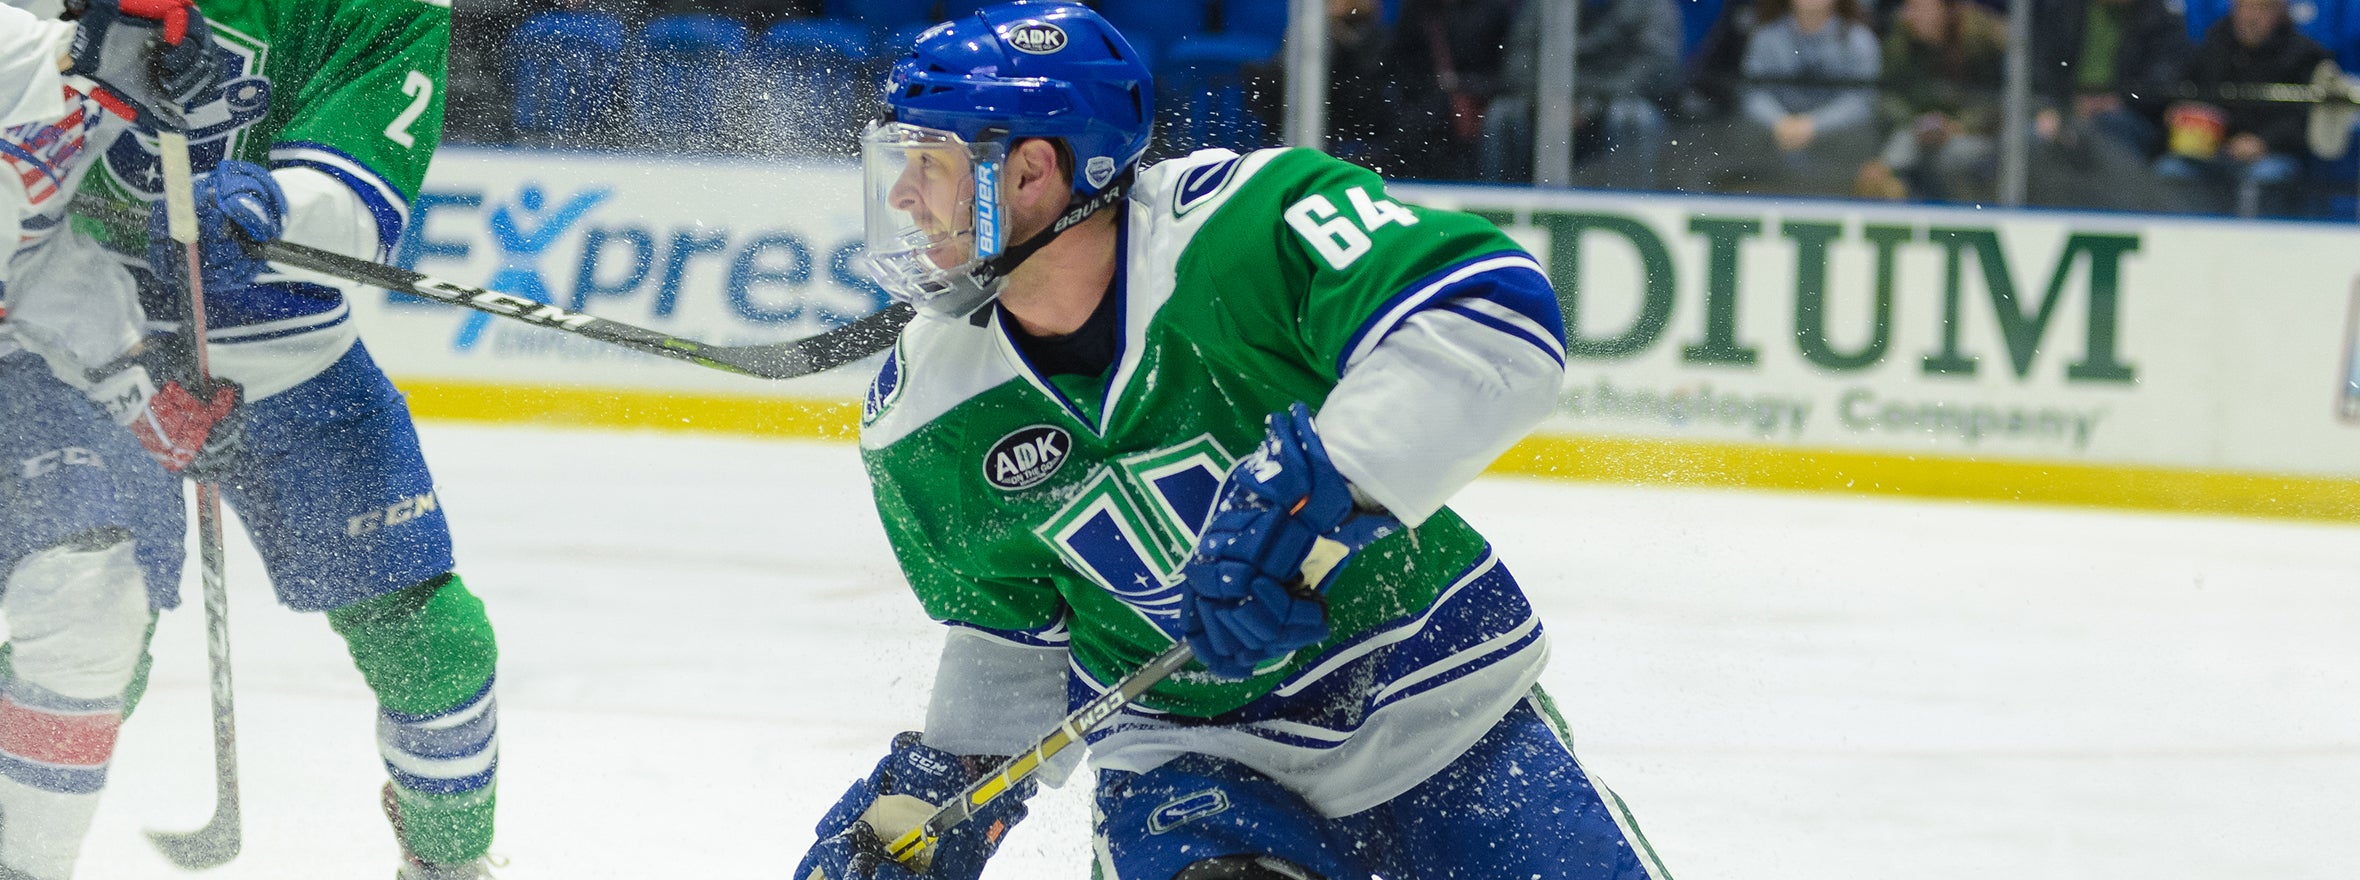 TWO 3RD PERIOD GOALS SINK COMETS